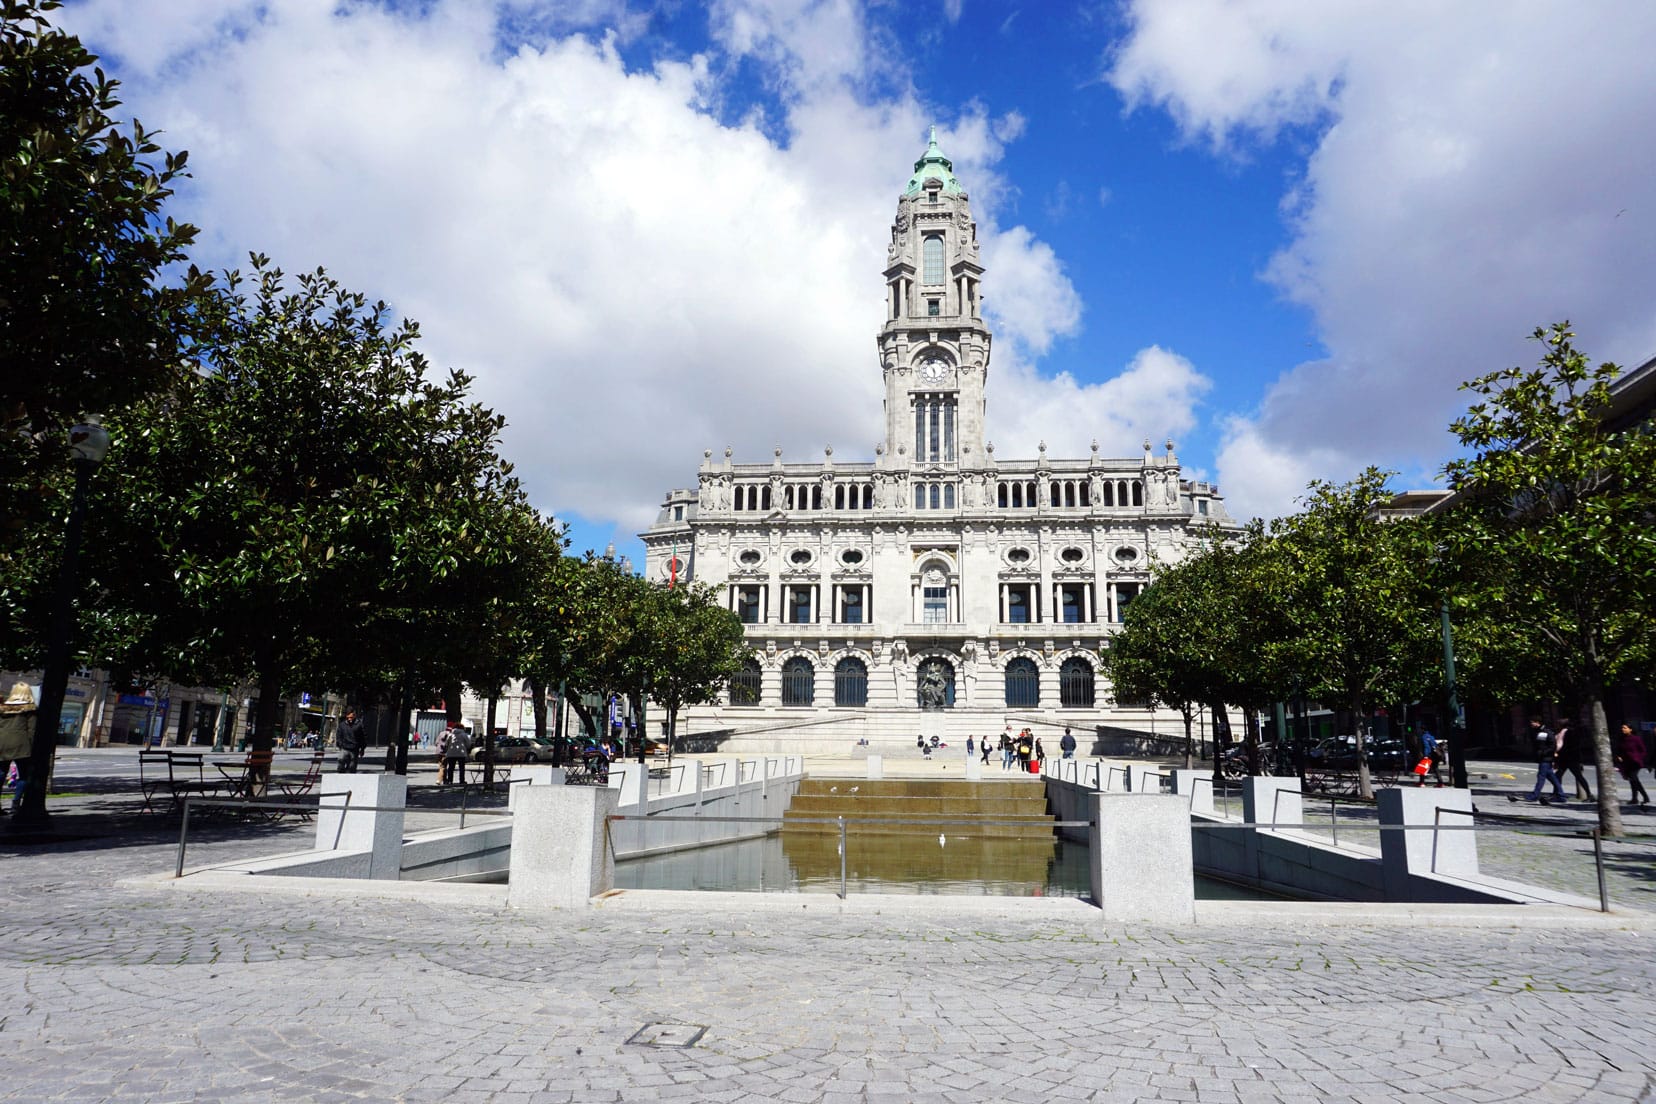 Porto's town Hall, Praco do municipio, a greay building with a central tower and a rectangle pool in front of it